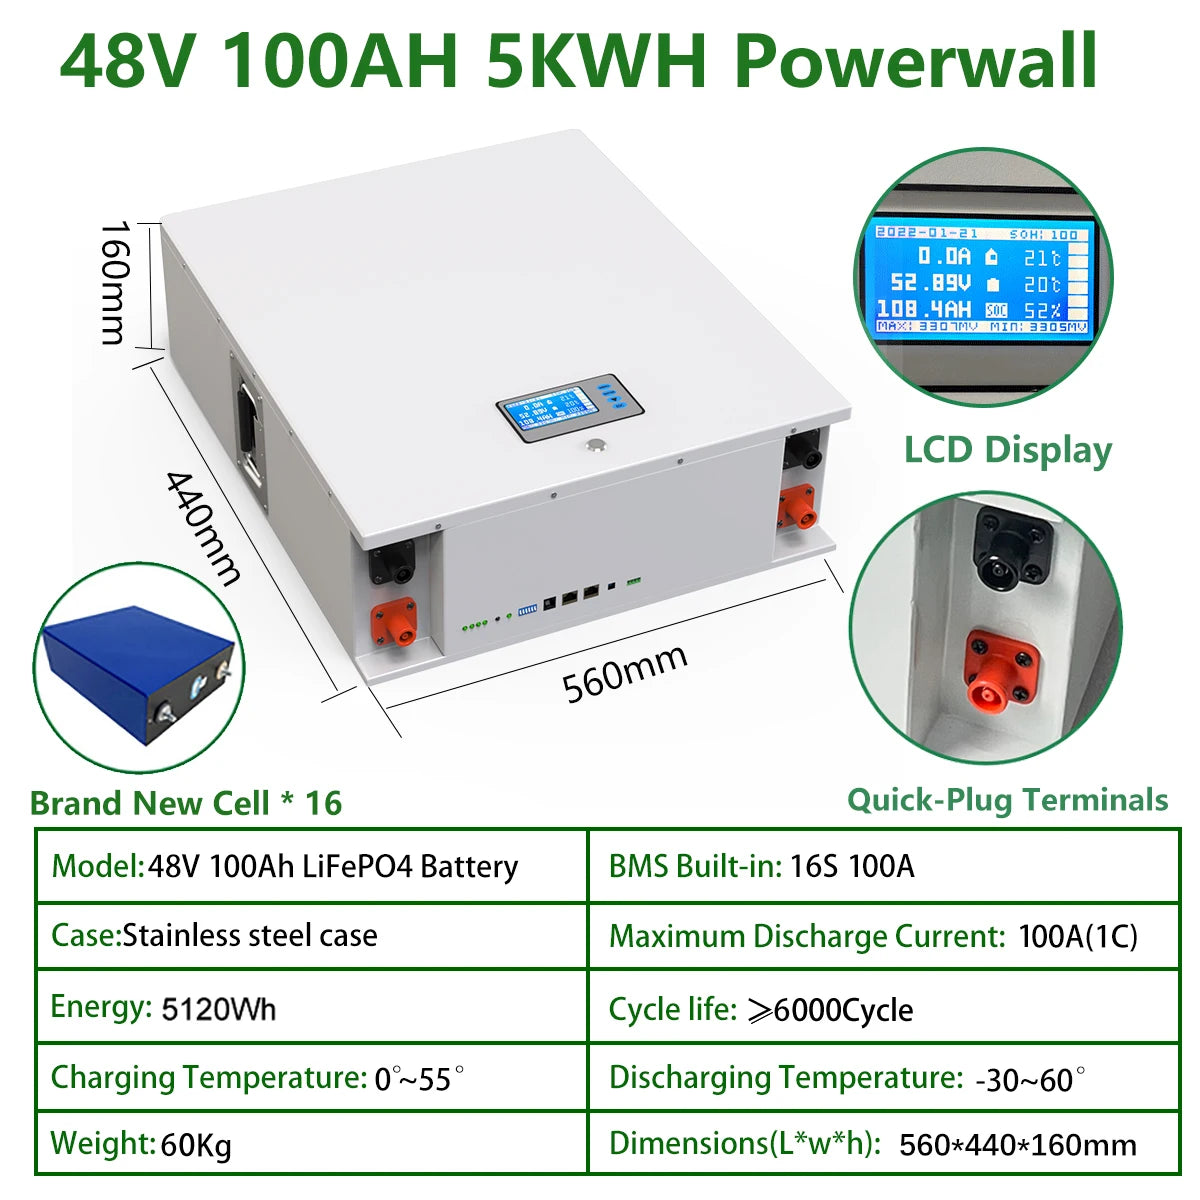 CERRNSS 48V 100Ah LiFePO4 Lithium Battery, Lithium battery with built-in BMS for solar-powered homes: reliable, efficient, and durable.